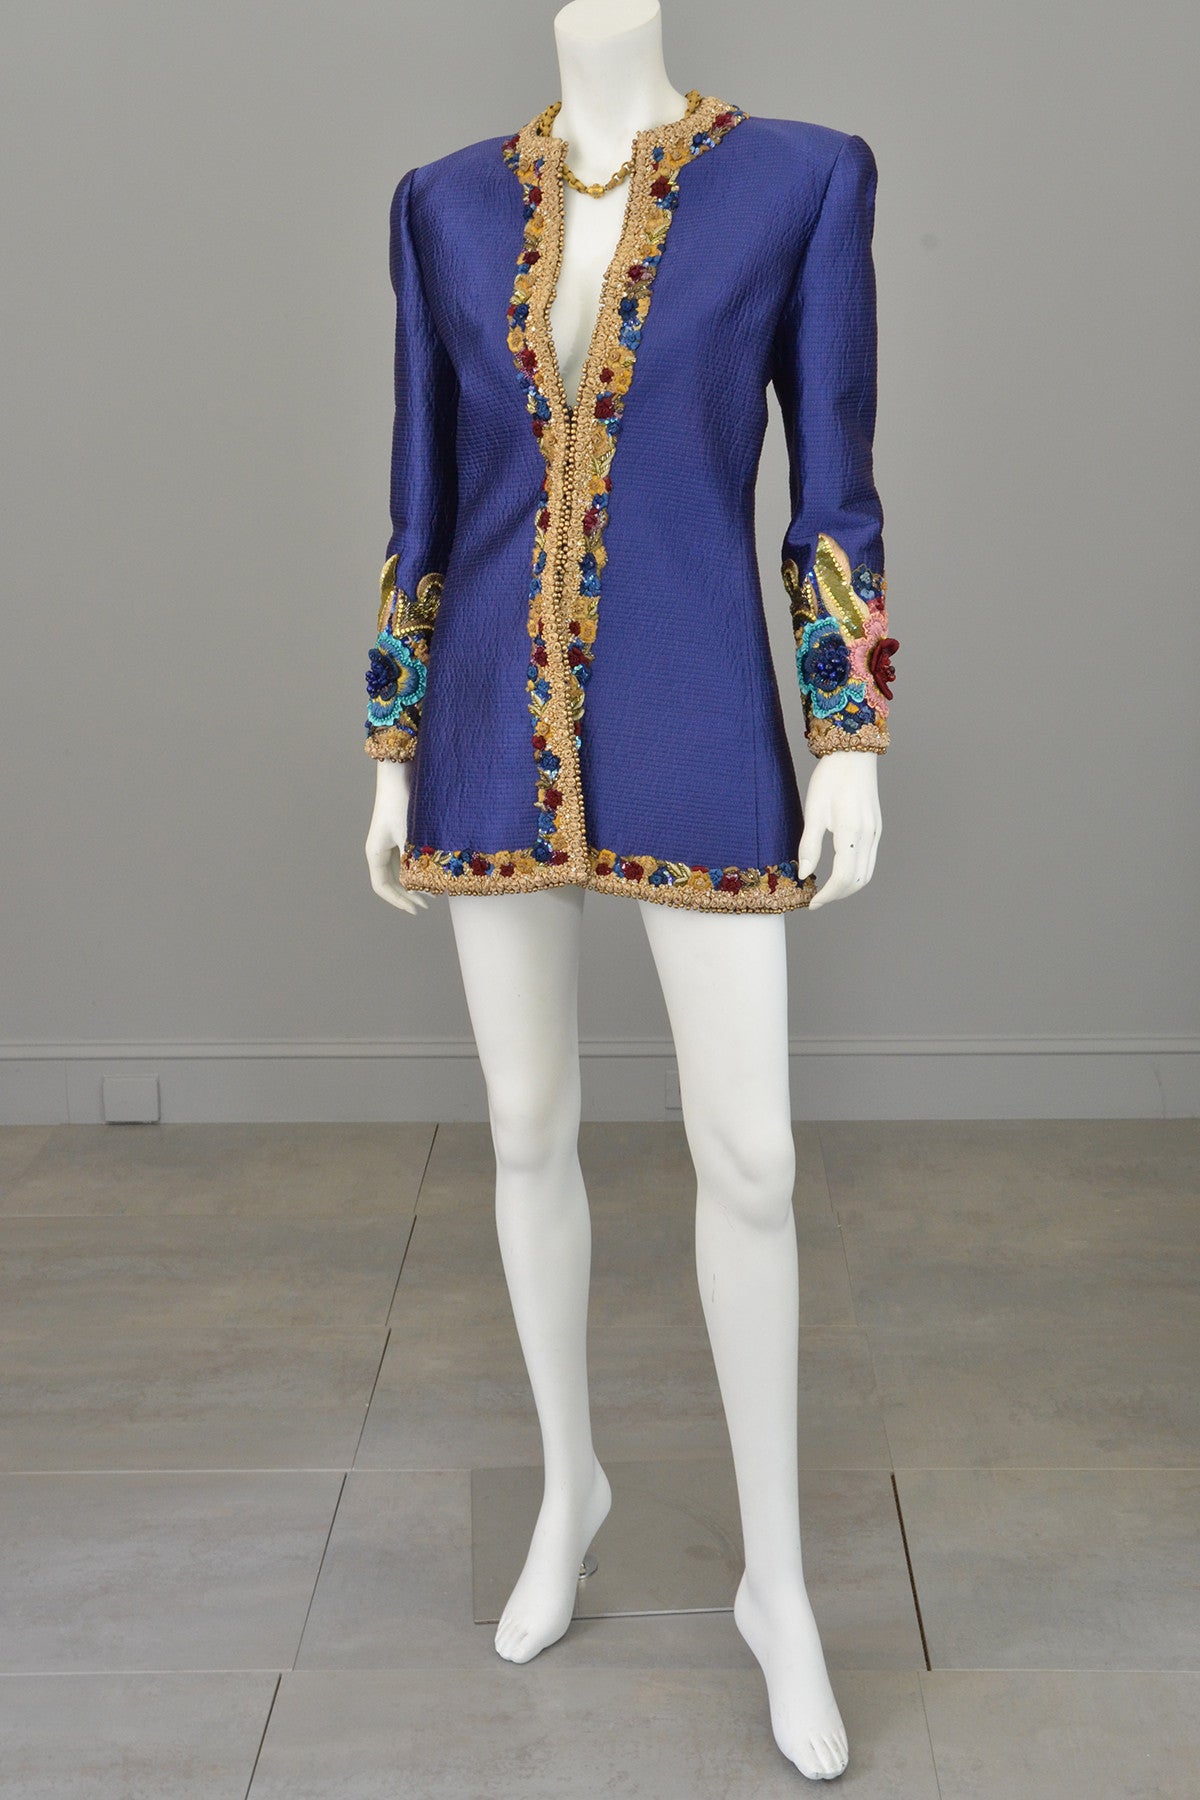 Mary McFadden Couture Embroidered Beaded Evening Coat Jacket